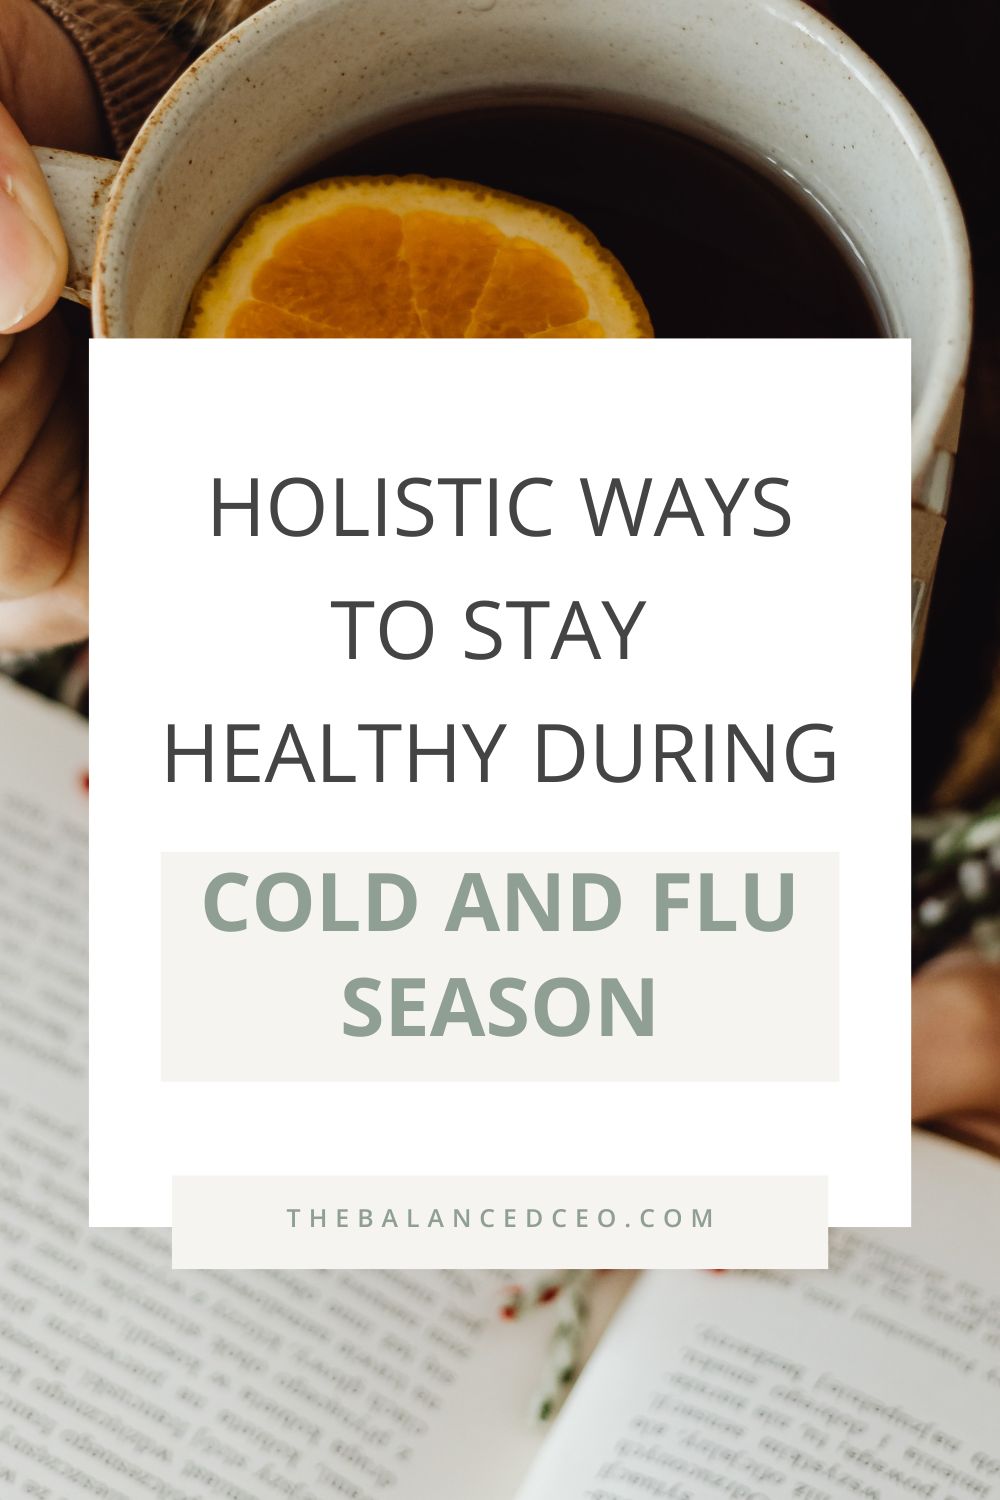 Holistic Ways to Stay Healthy During Cold and Flu Season